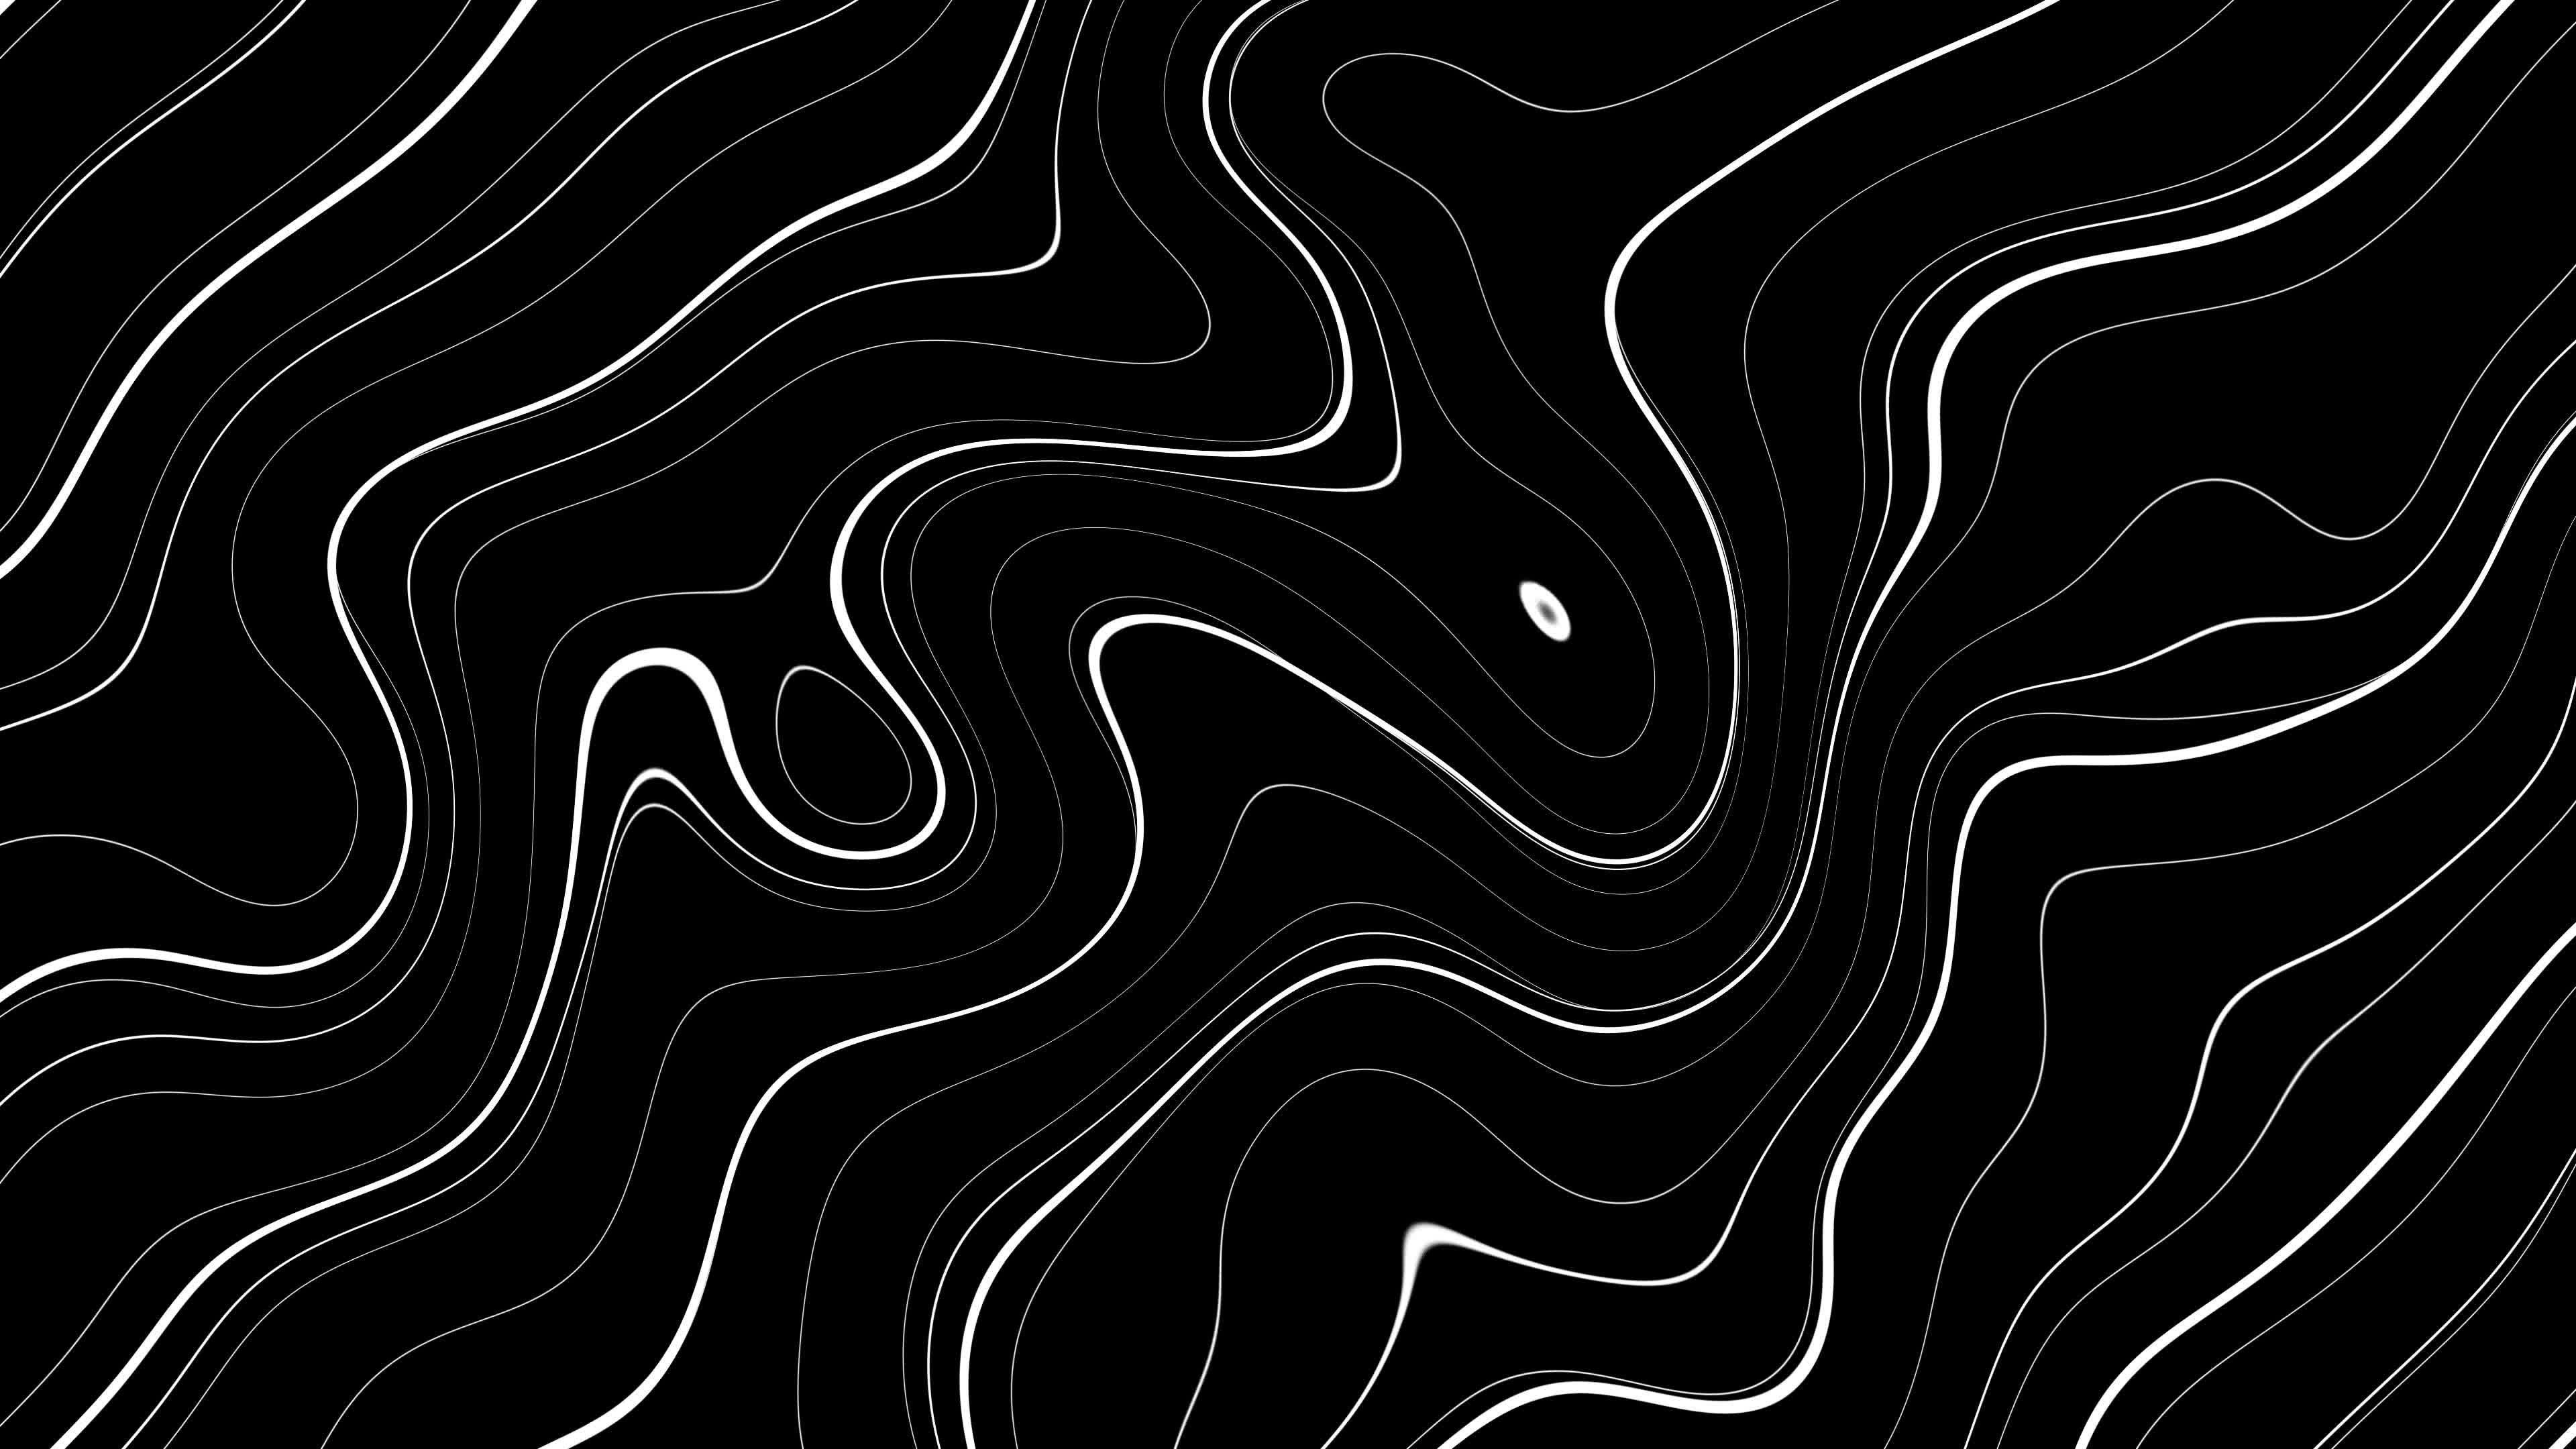 Vintage Abstract Black White Wave Background 26305040 Stock Video At